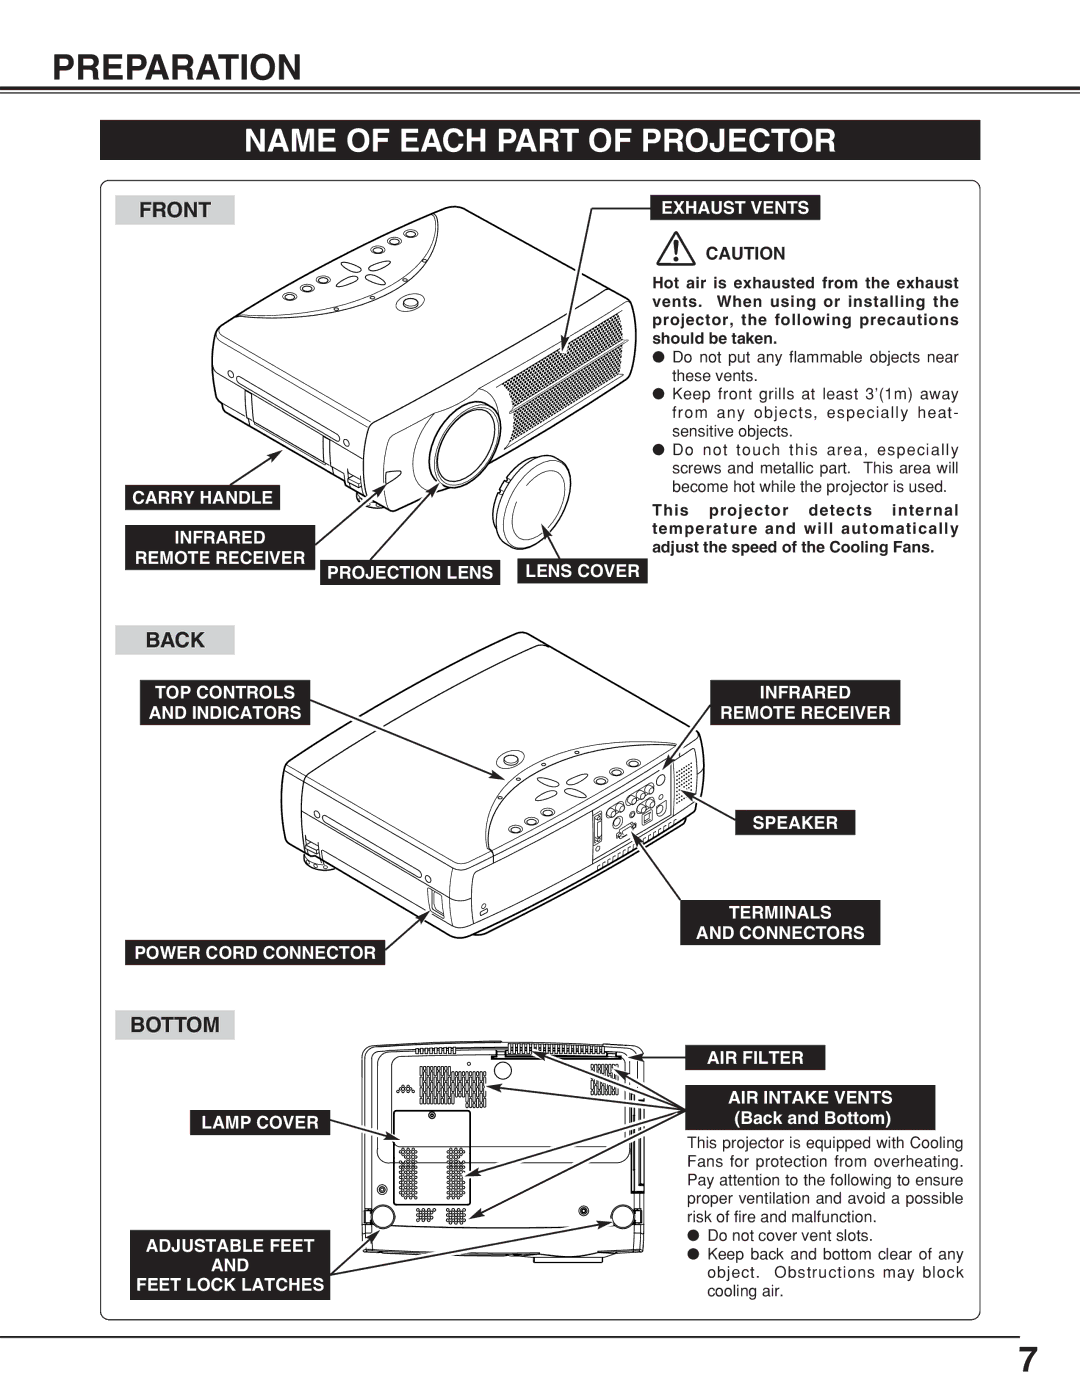 BOXLIGHT CP-320t manual Preparation, Name of Each Part of Projector 